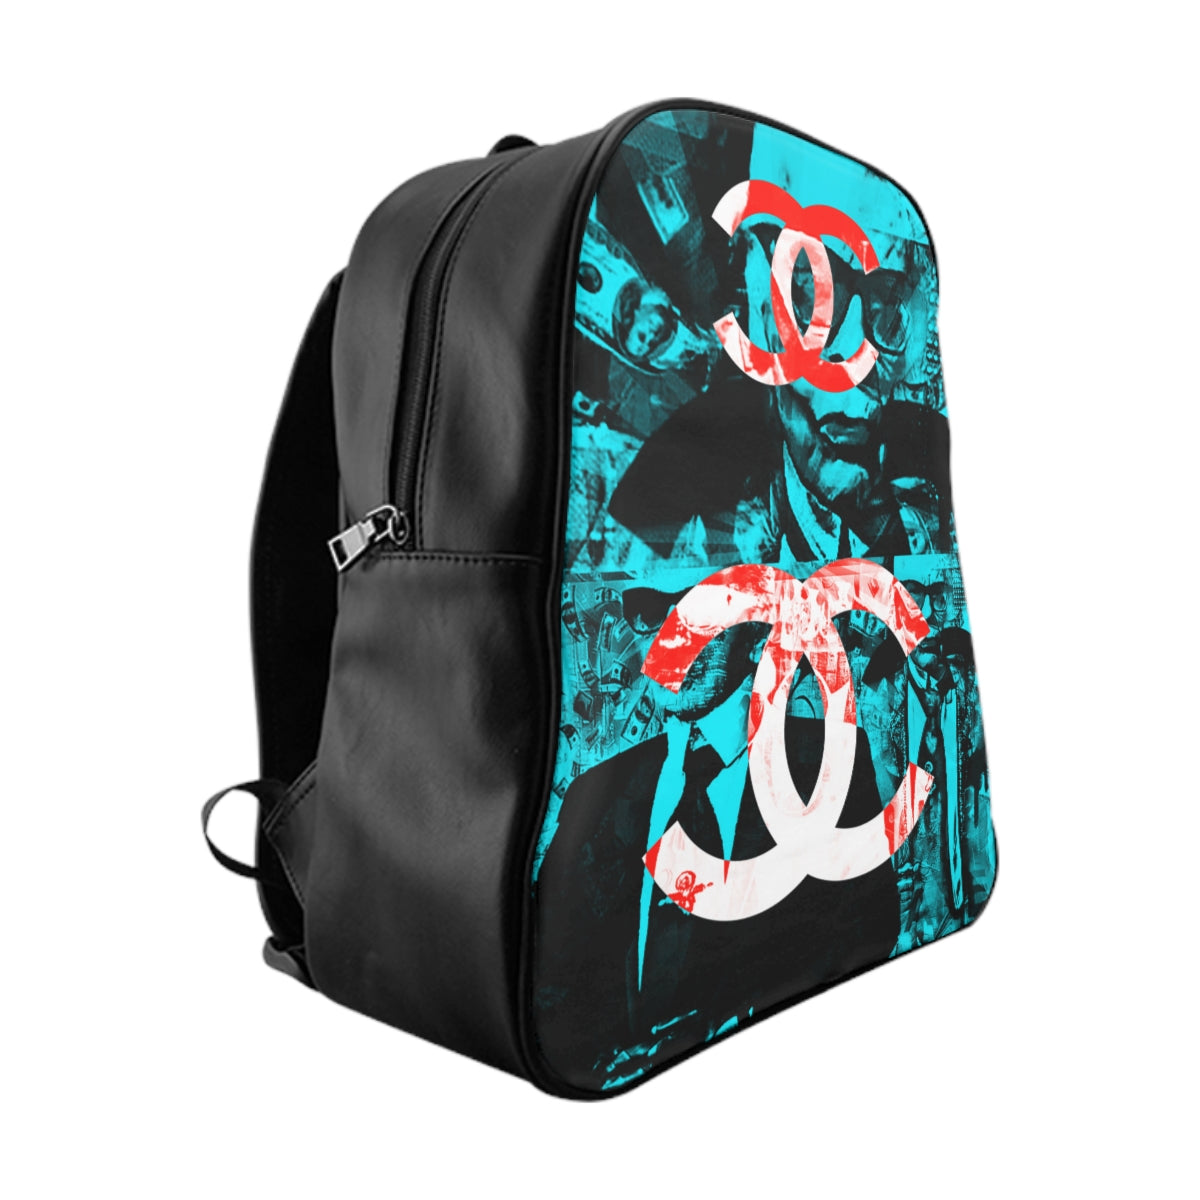 Getrott Inspired by C h a n e l Graffiti Blue School Backpack Carry-On Travel Check Luggage 4-Wheel Spinner Suitcase Bag Multiple Colors and Sizes